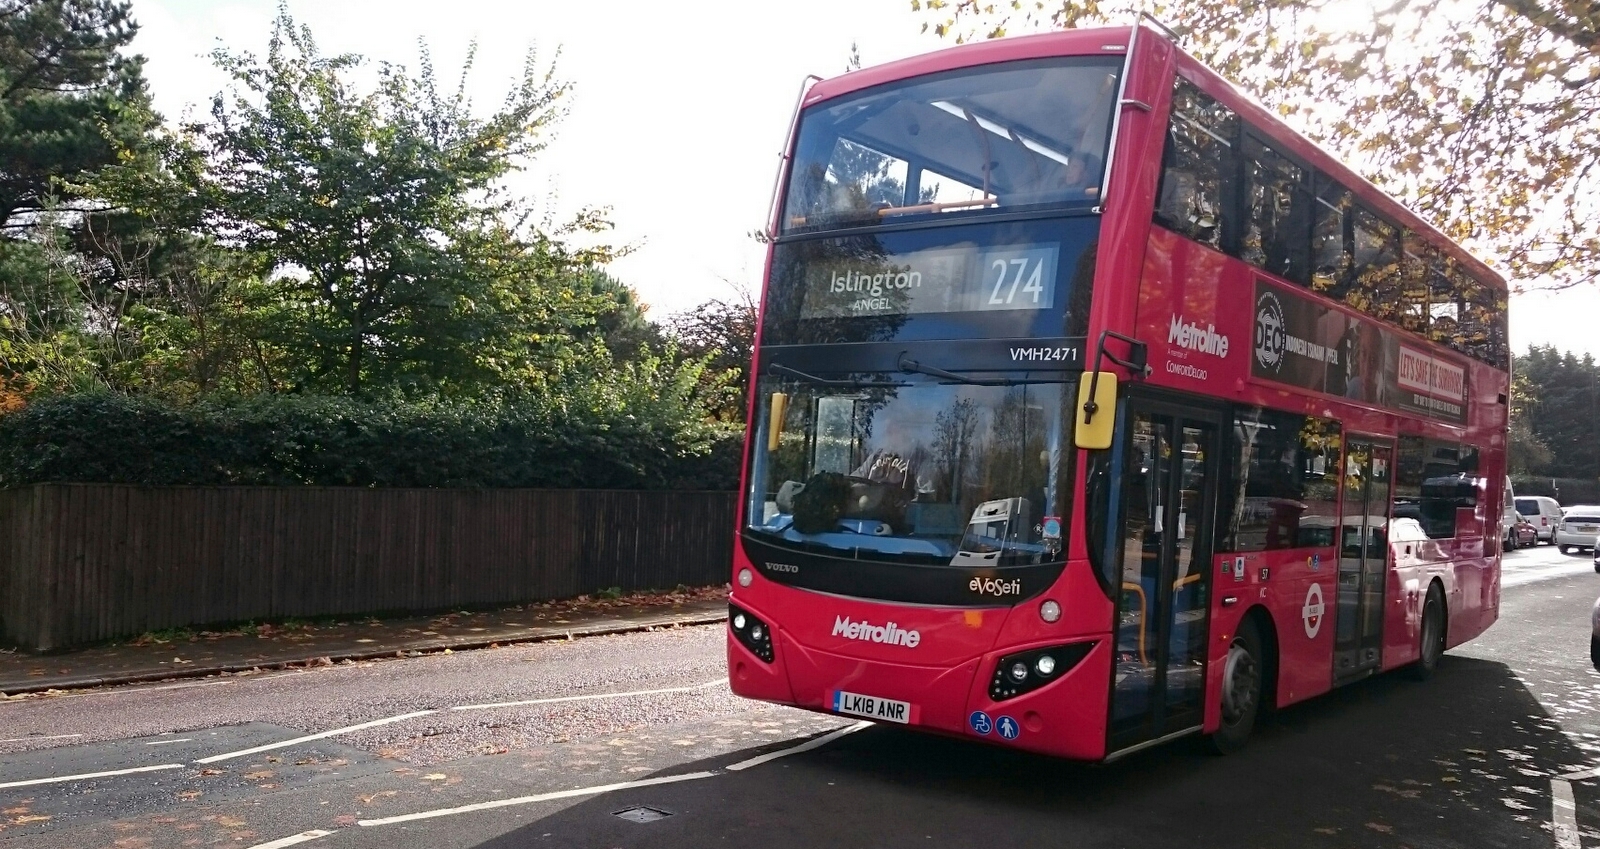 274 Bus Service Public Meeting - 9th October